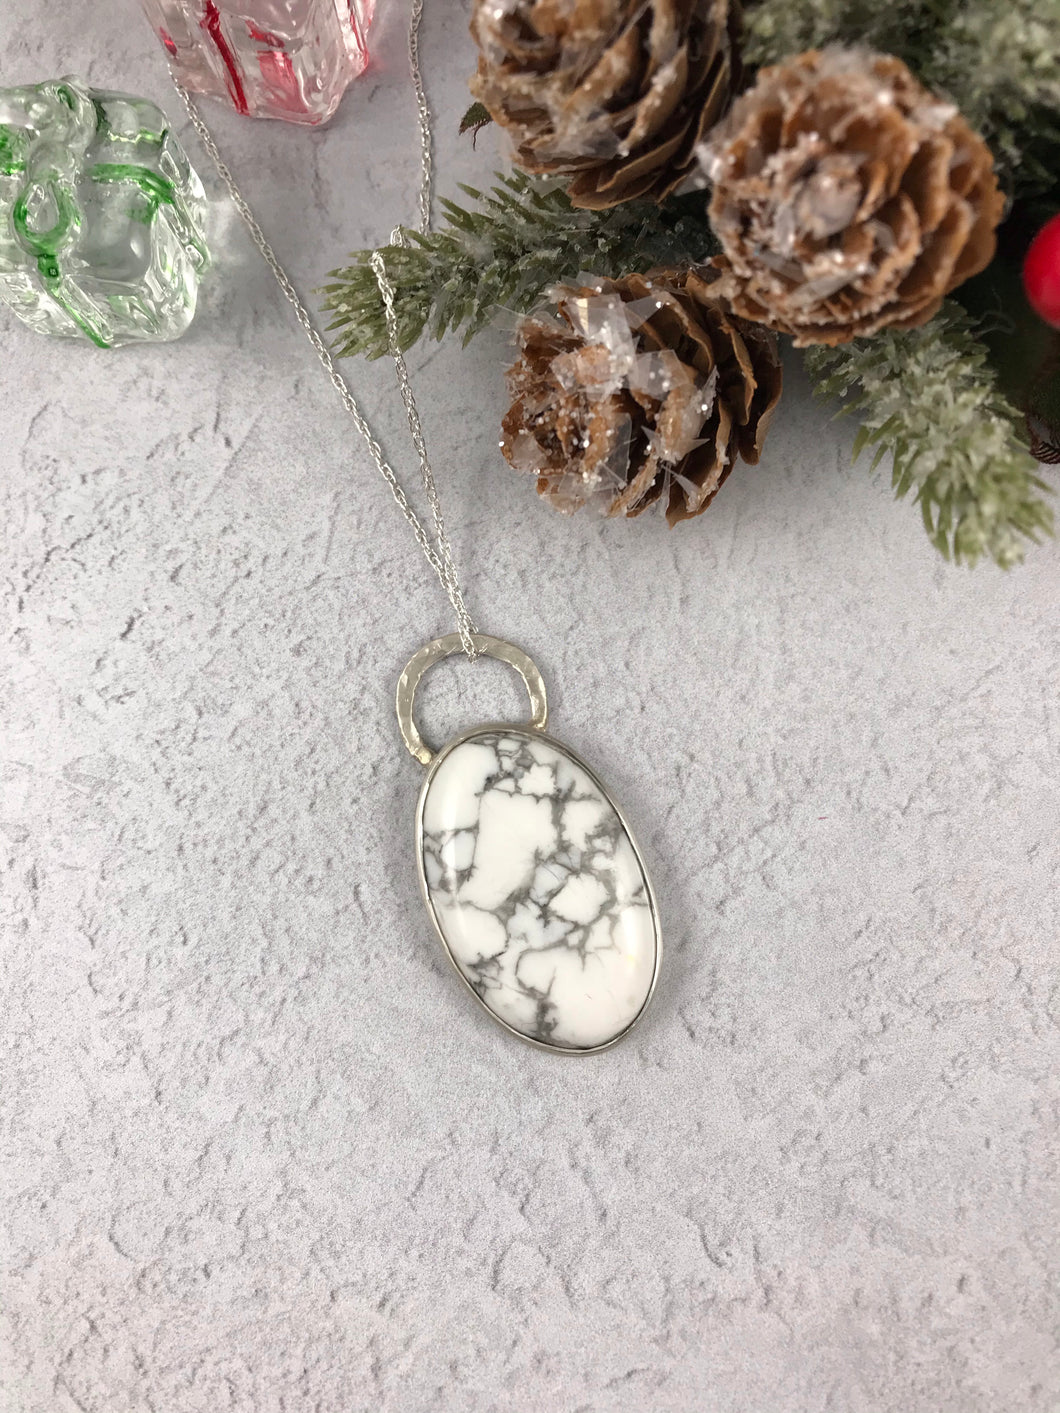 Sterling Silver and Howlite Pendant and Chain